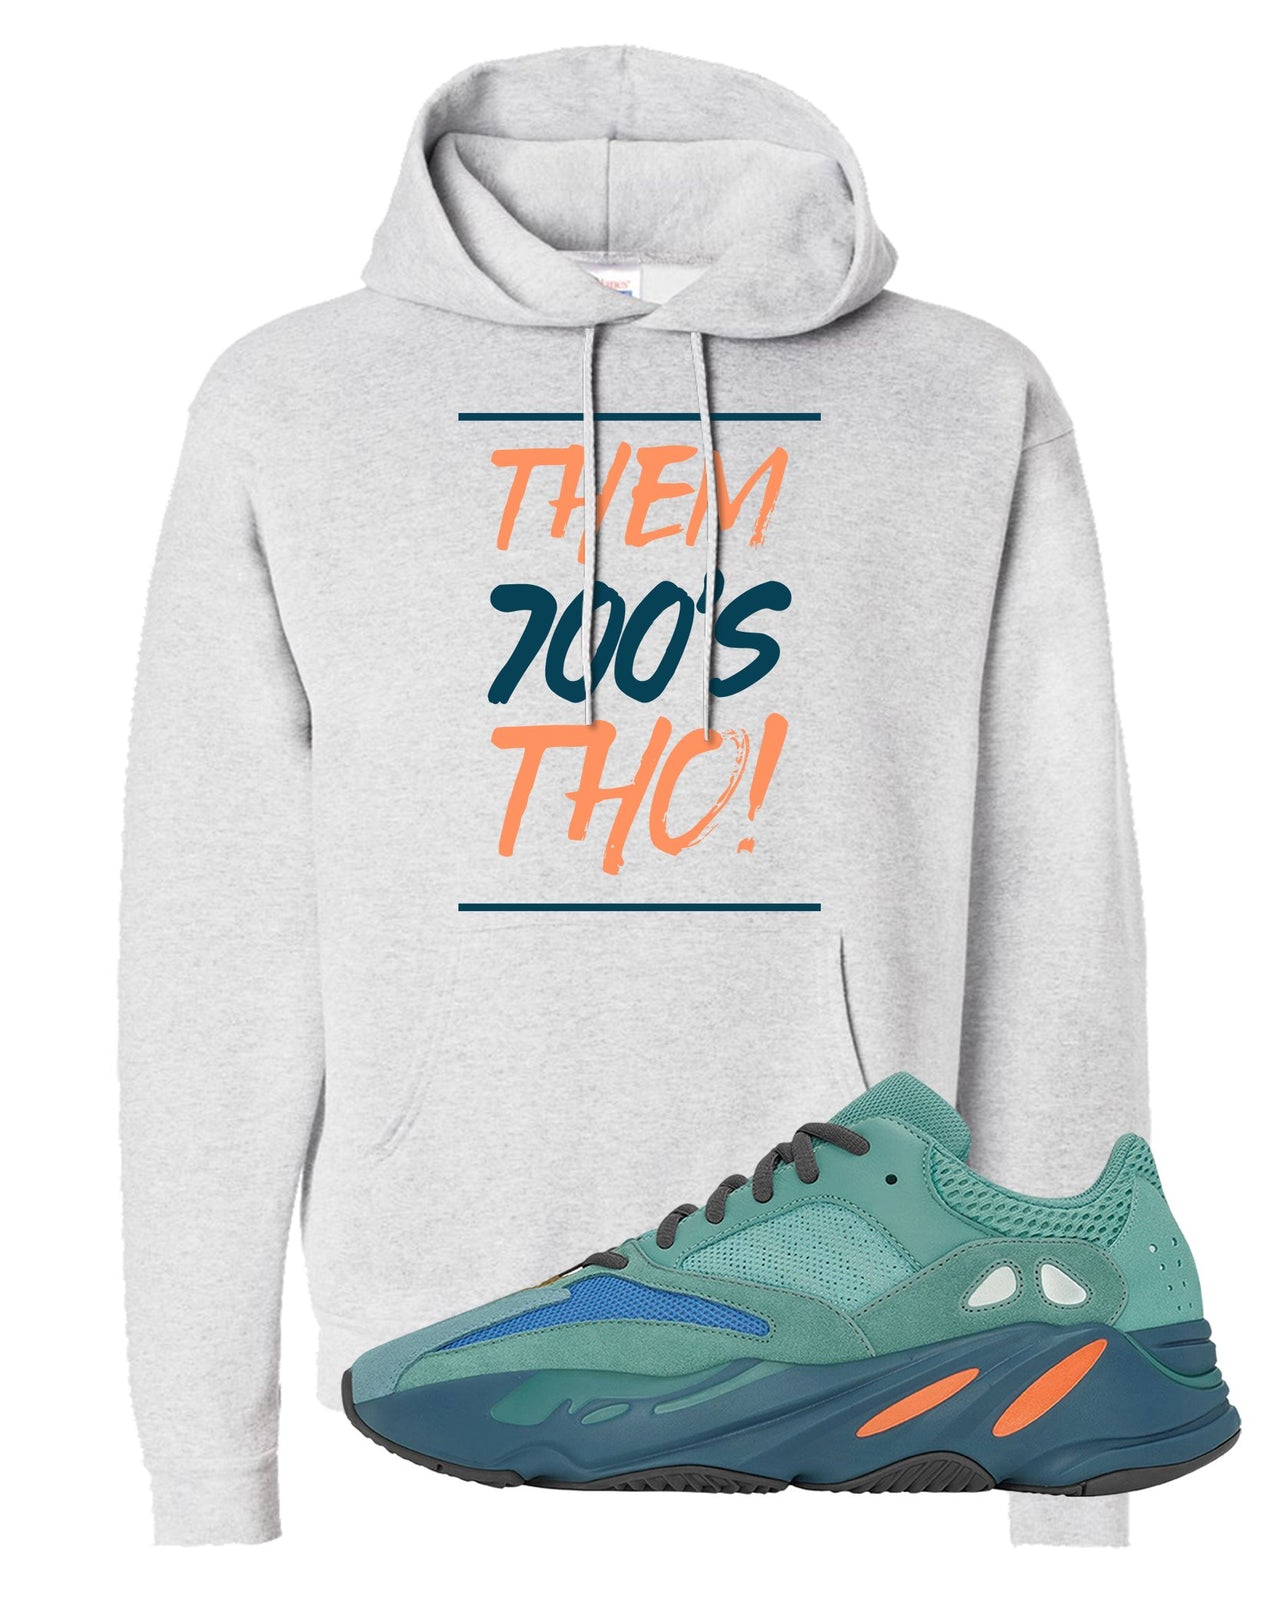 Faded Azure 700s Hoodie | Them 700's Tho, Ash